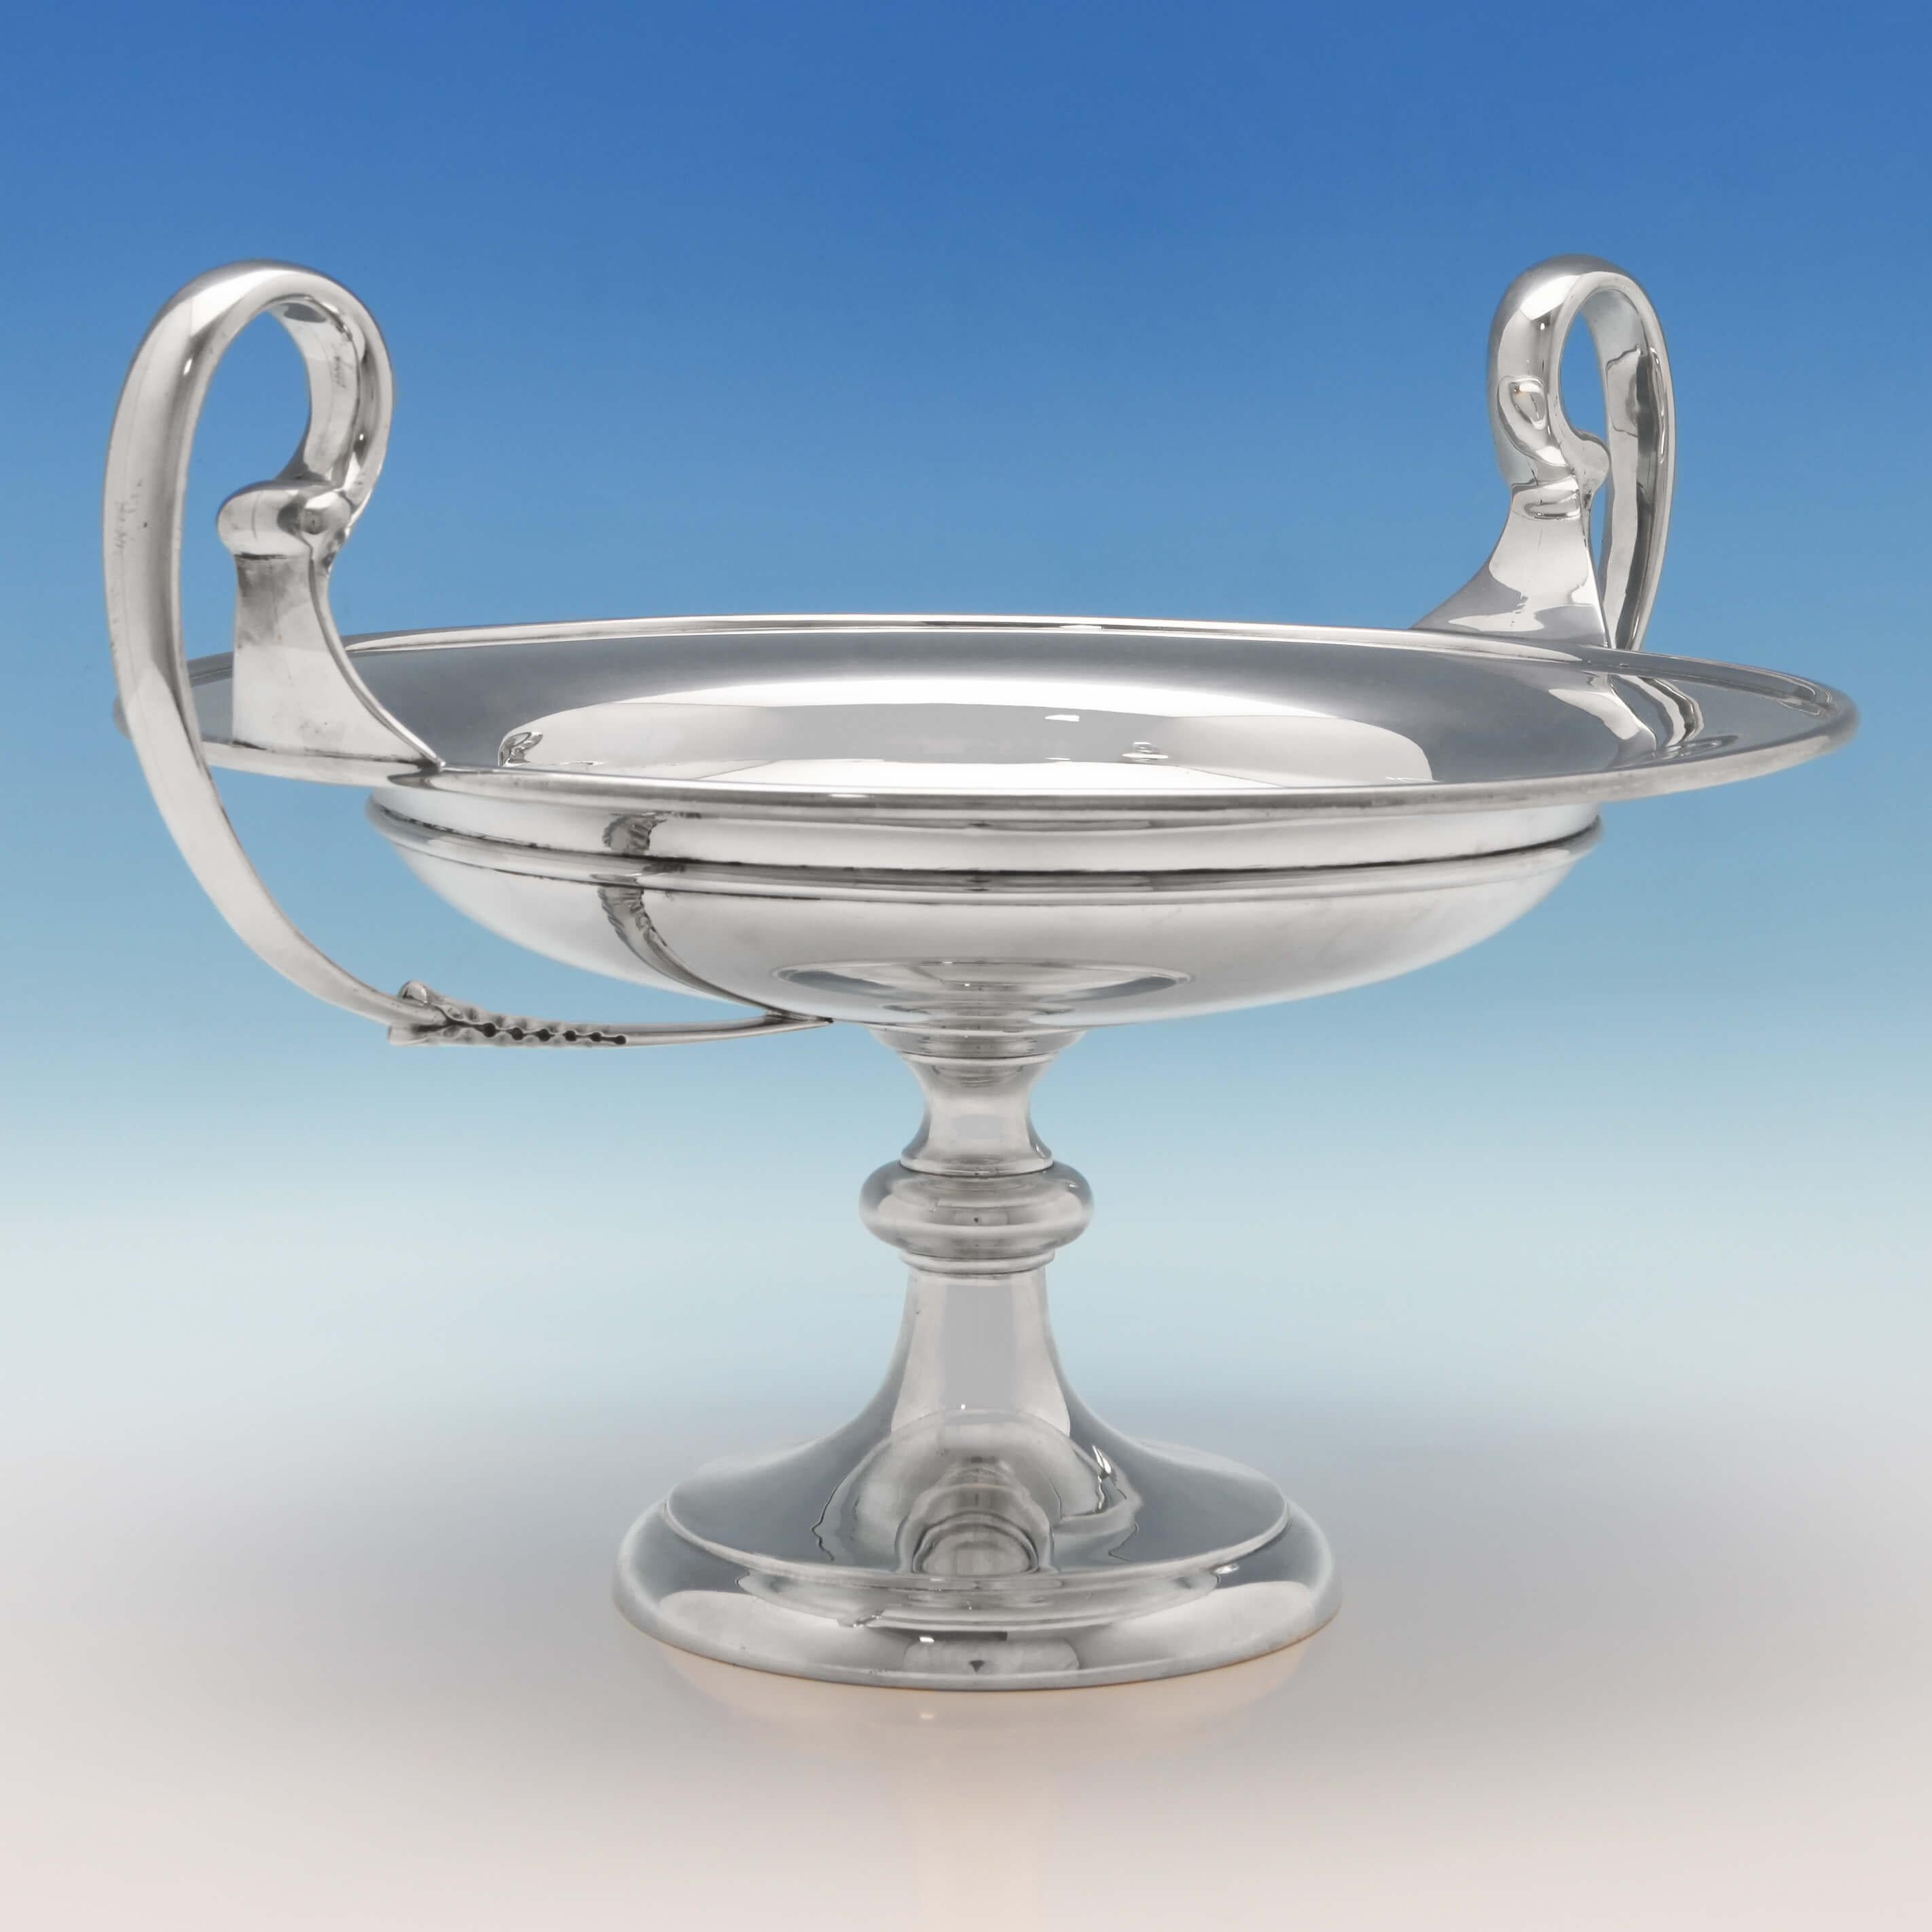 Hallmarked in London in 1914 by Pearce & Sons, this fantastic and generously proportioned, George V, Antique, Sterling Silver Tazza, is plain in style, standing on a pedestal base, and featuring harp handles with acanthus detailing. The tazza